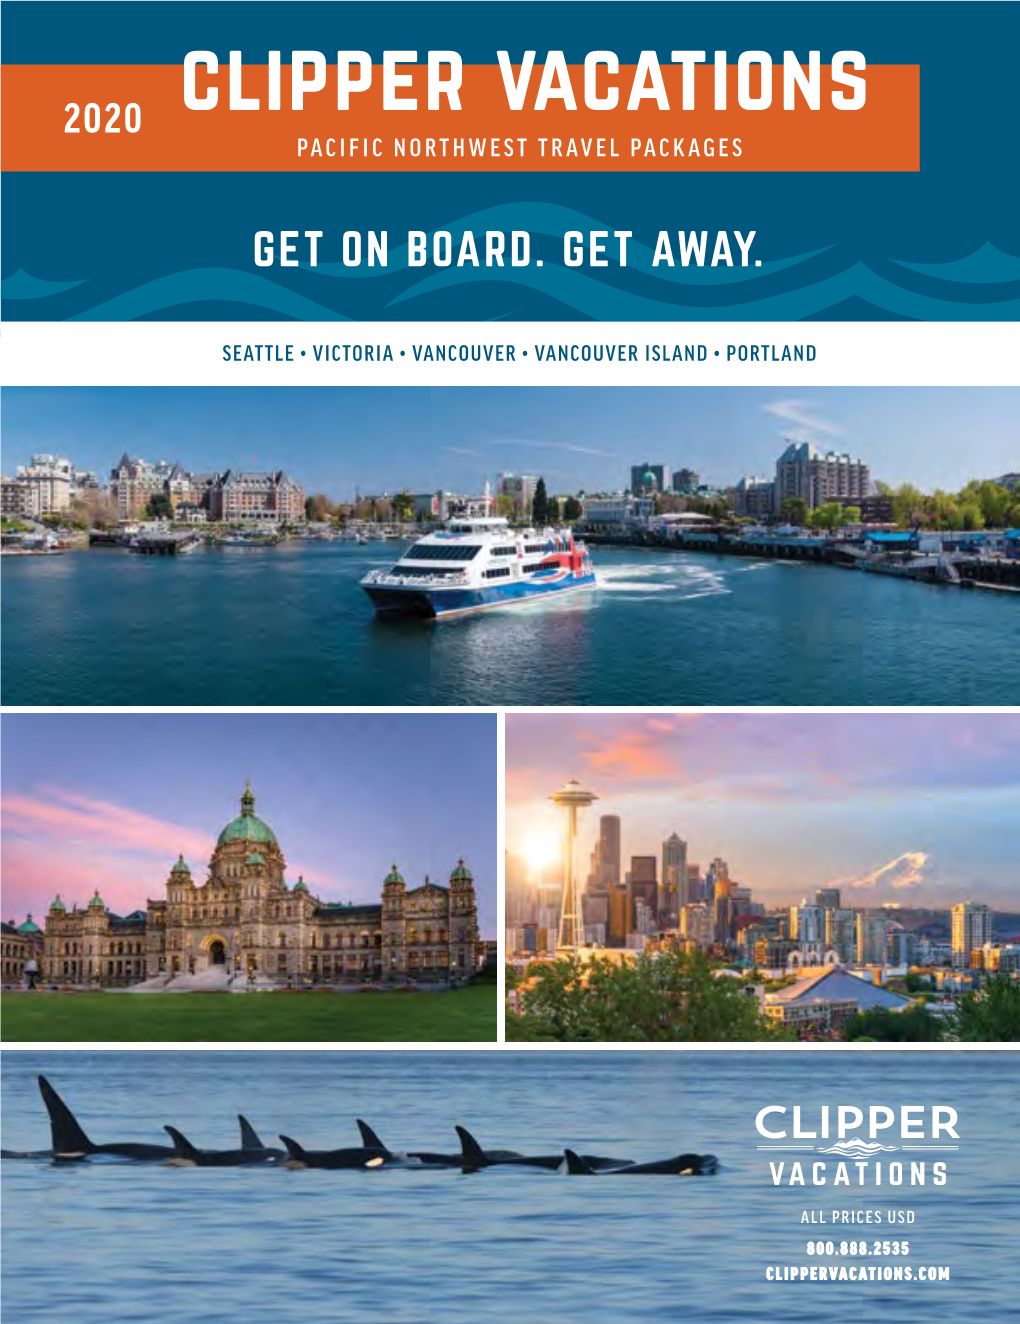 Clipper Vacations PACIFIC NORTHWEST TRAVEL PACKAGES